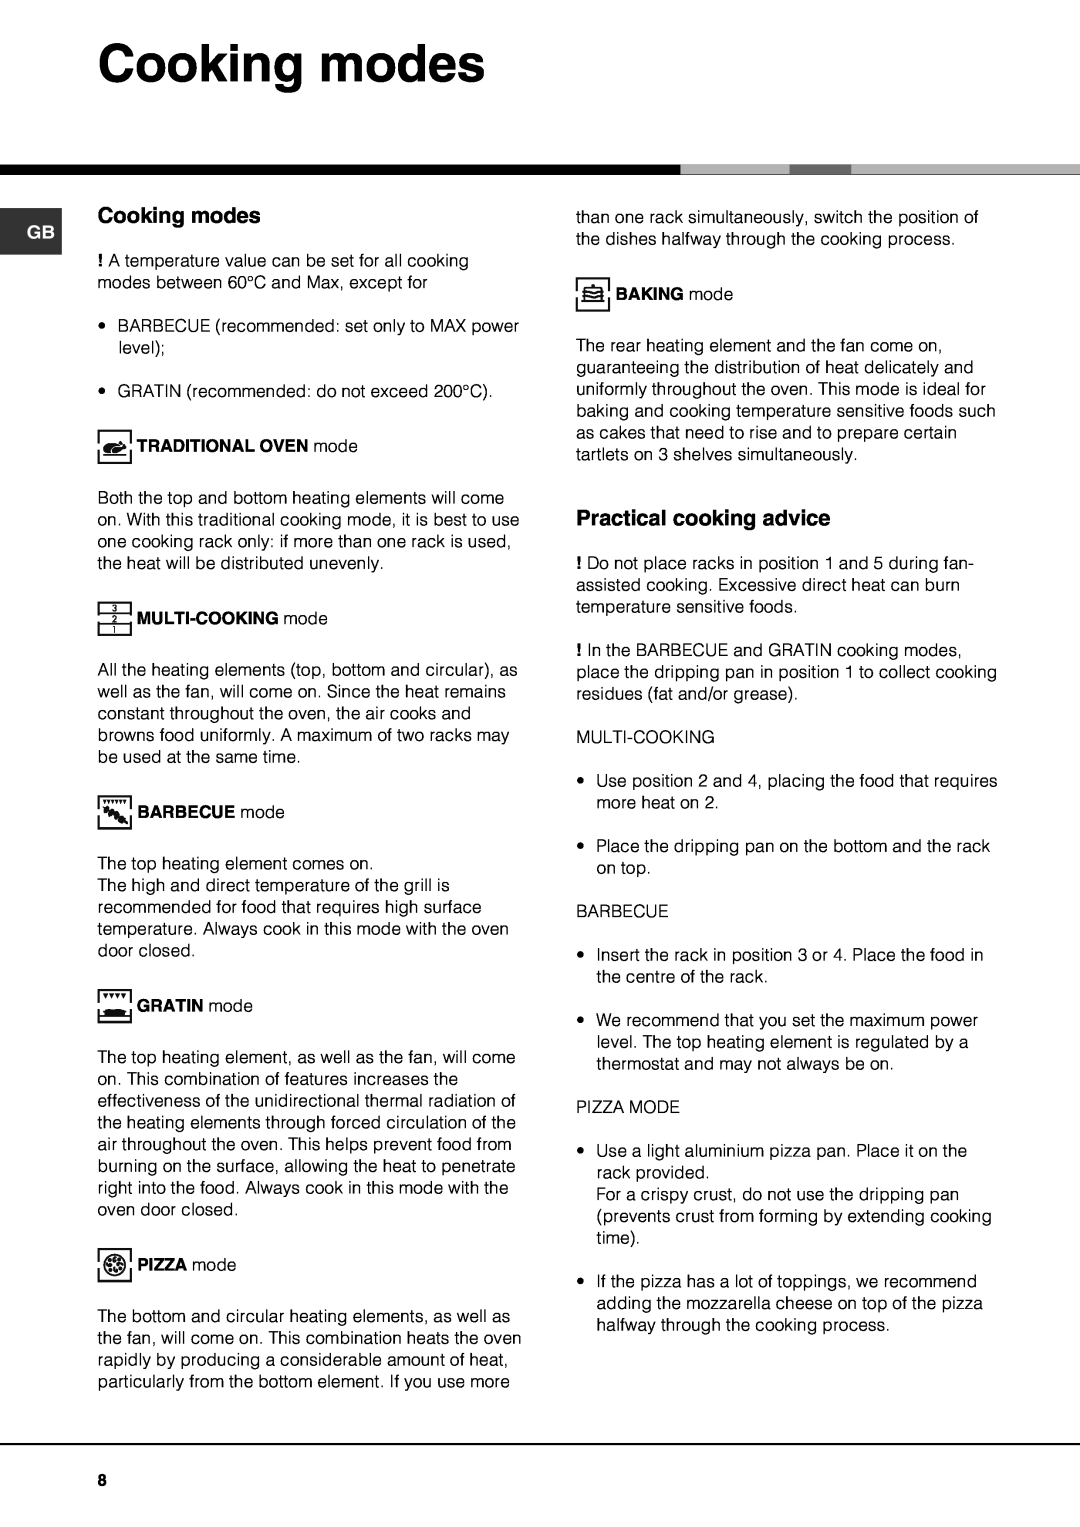 Hotpoint SQ61I manual Cooking modes, Practical cooking advice 